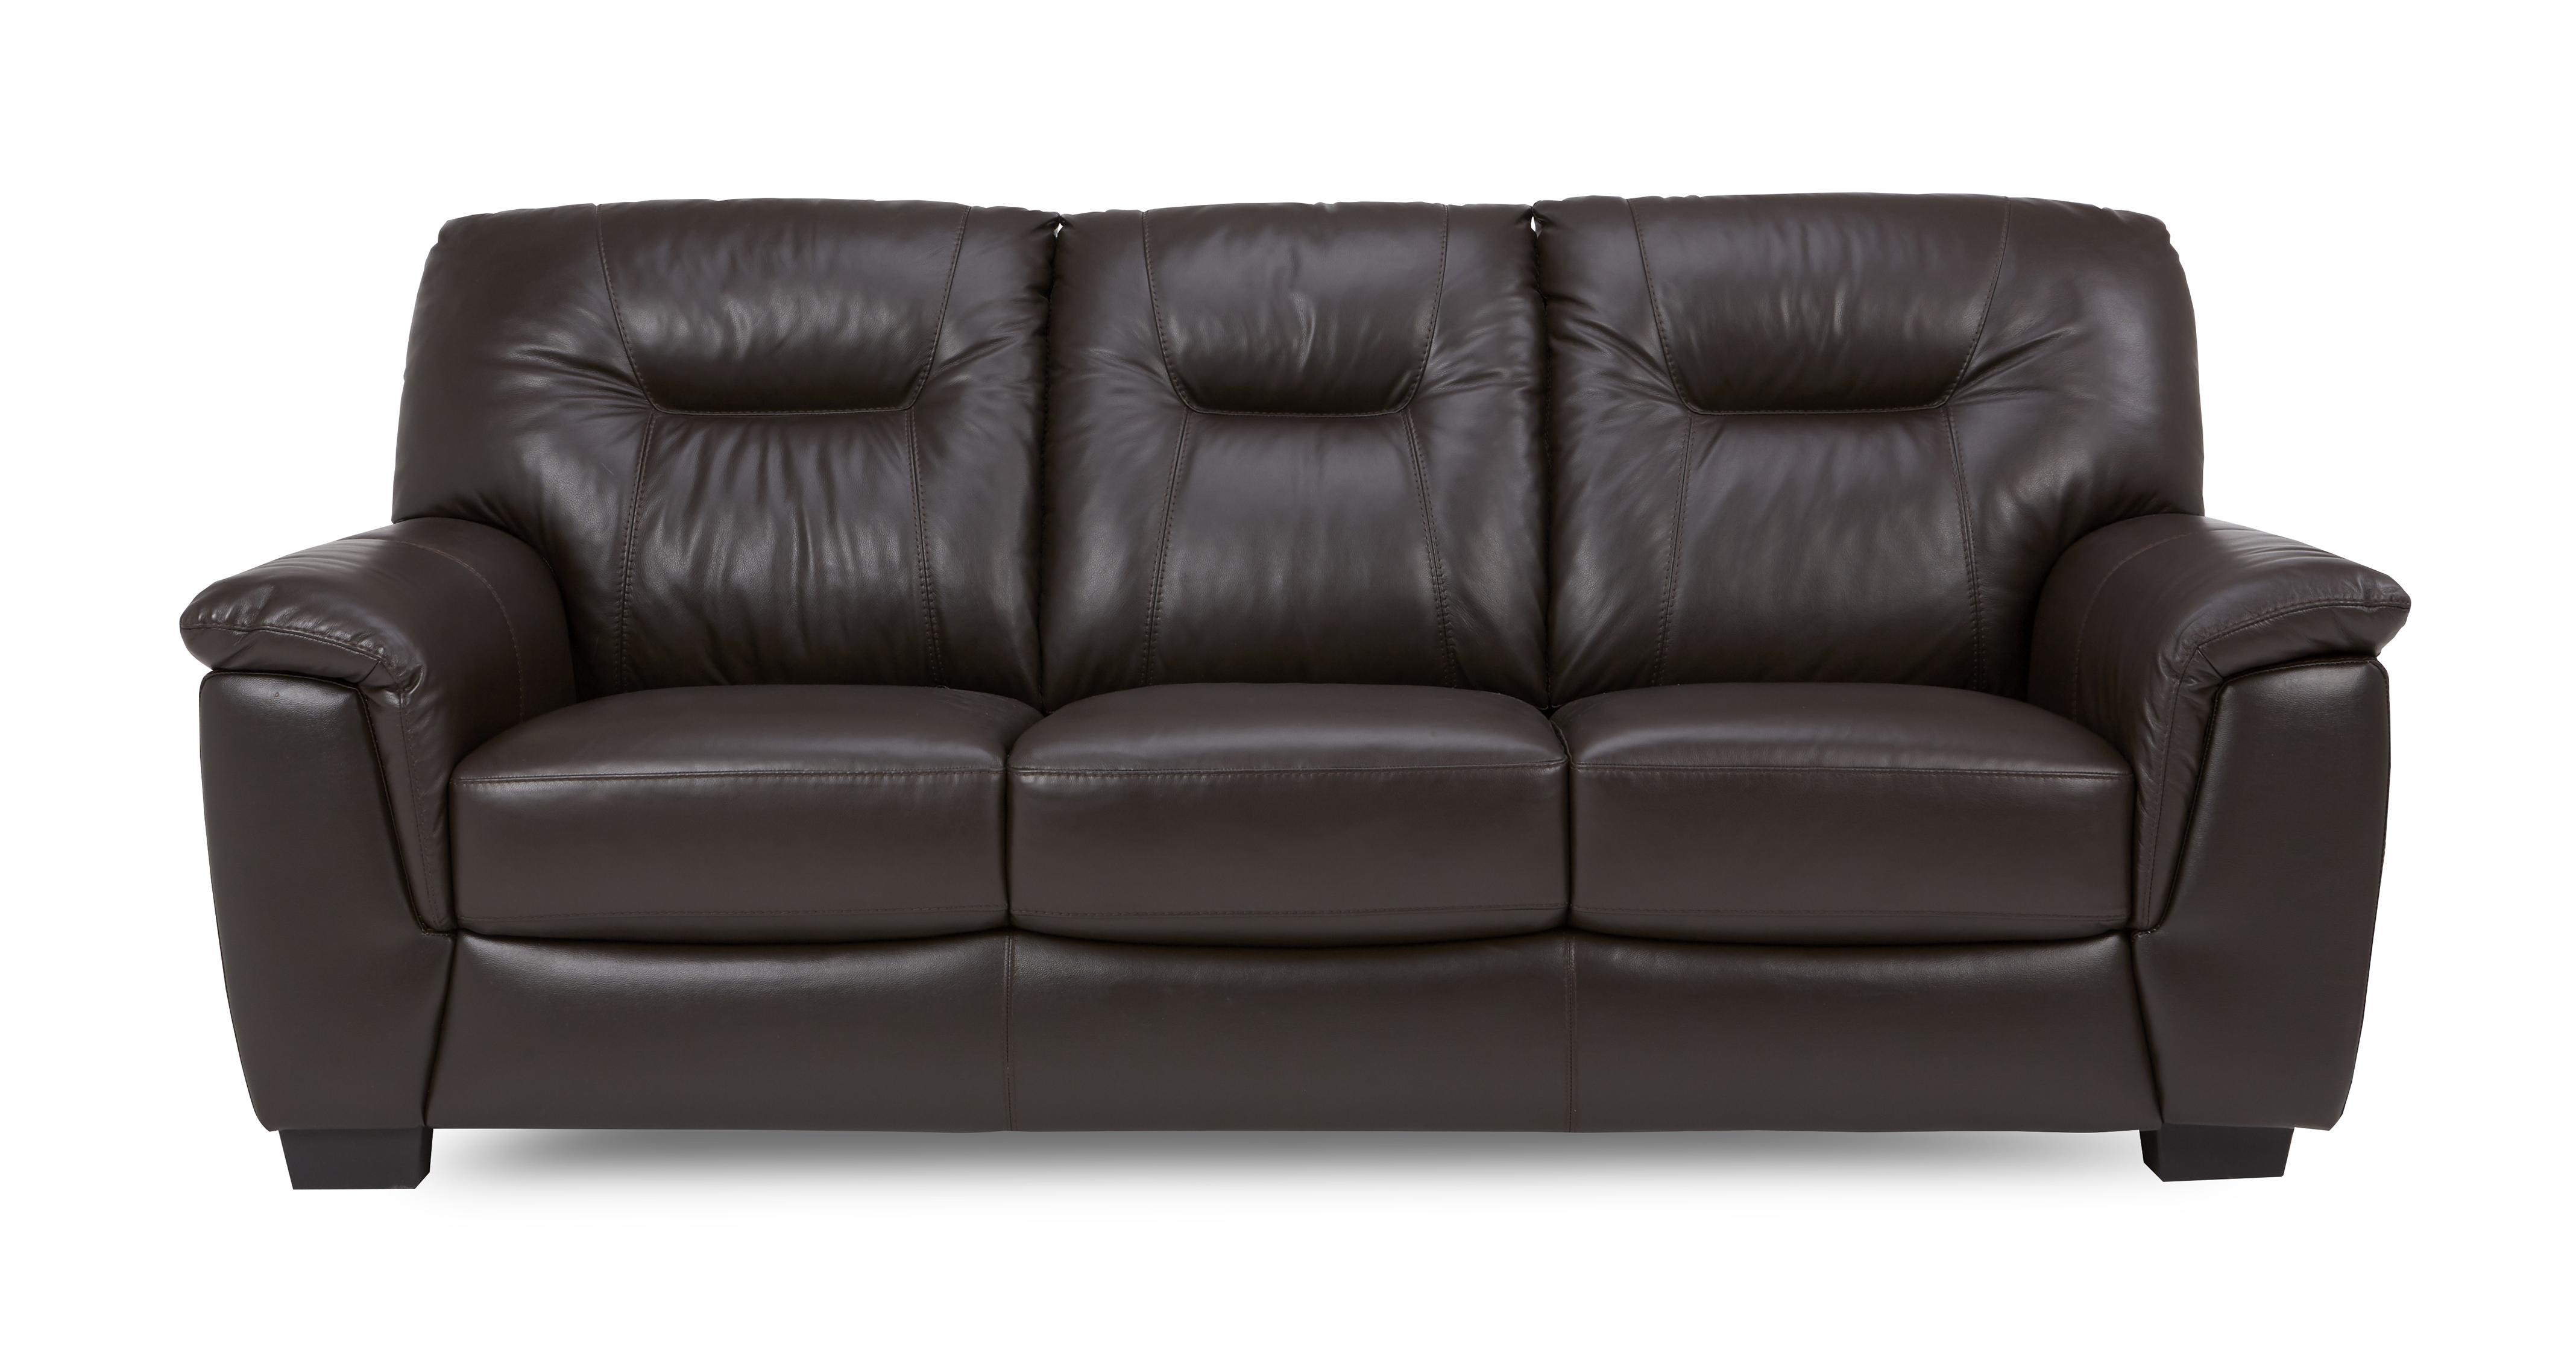 Cato Leather And Leather Look 3 Seater Sofa Premium DFS